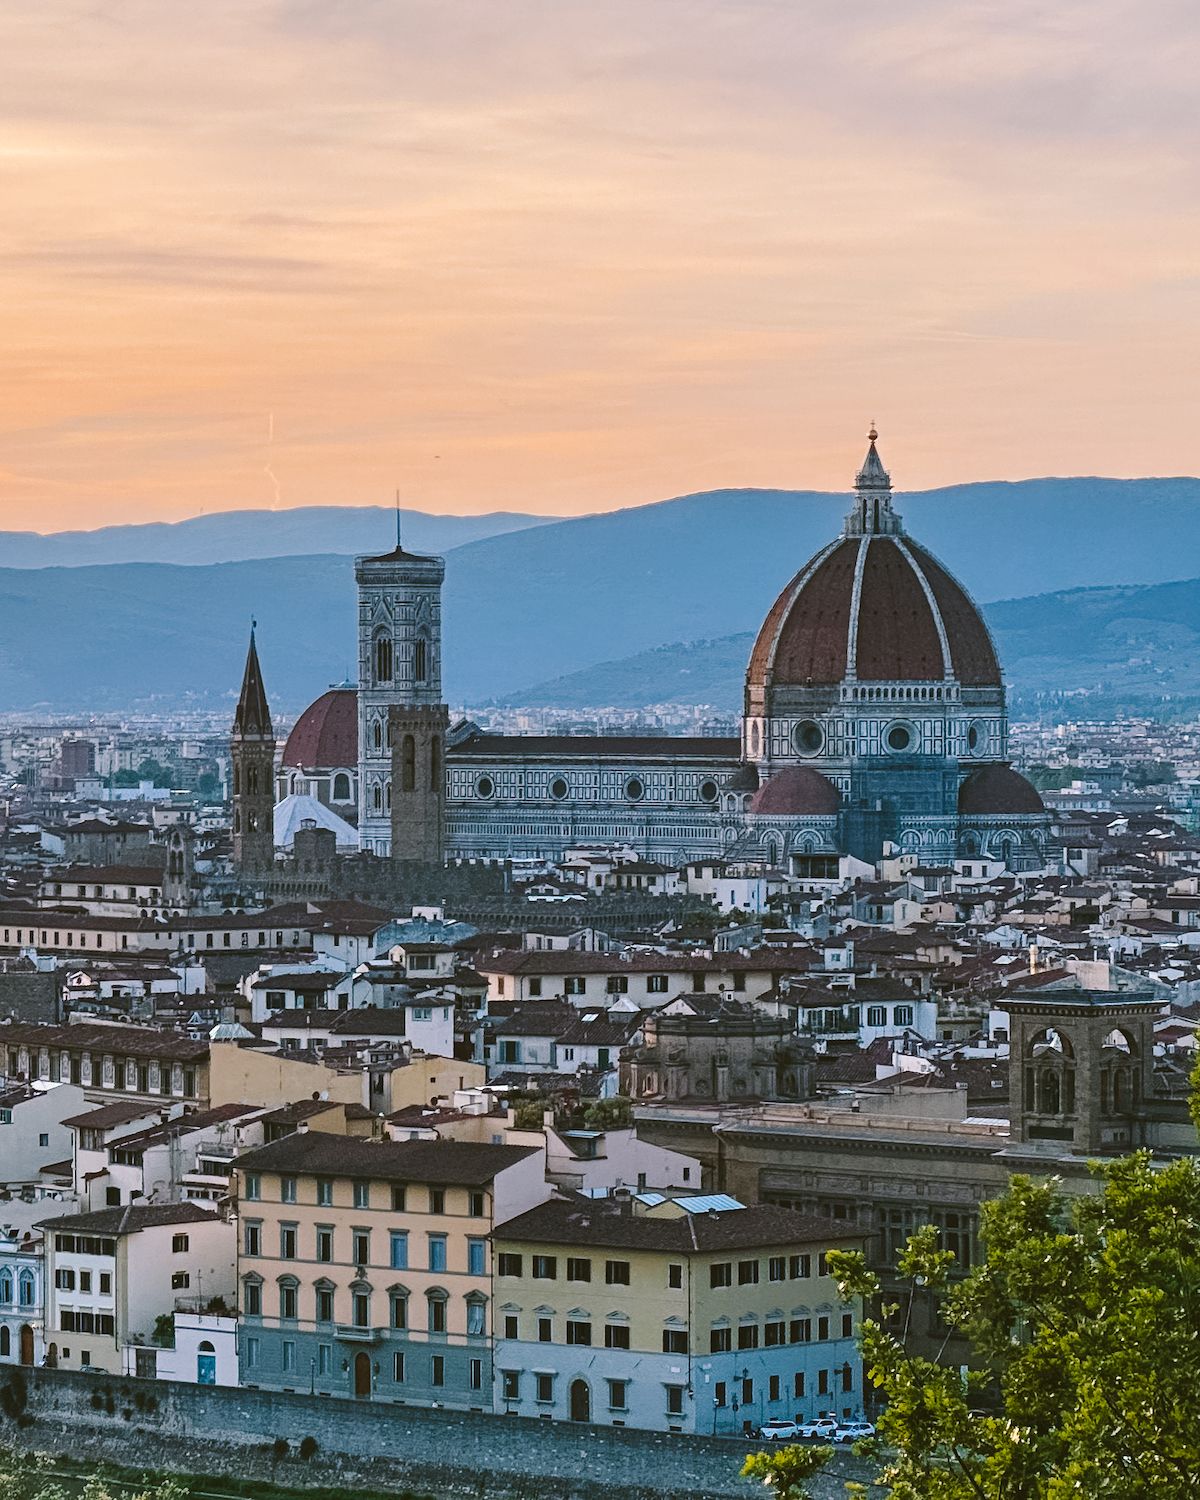 Panoramic view of Florence and the iconic Duomo with its red curved roof